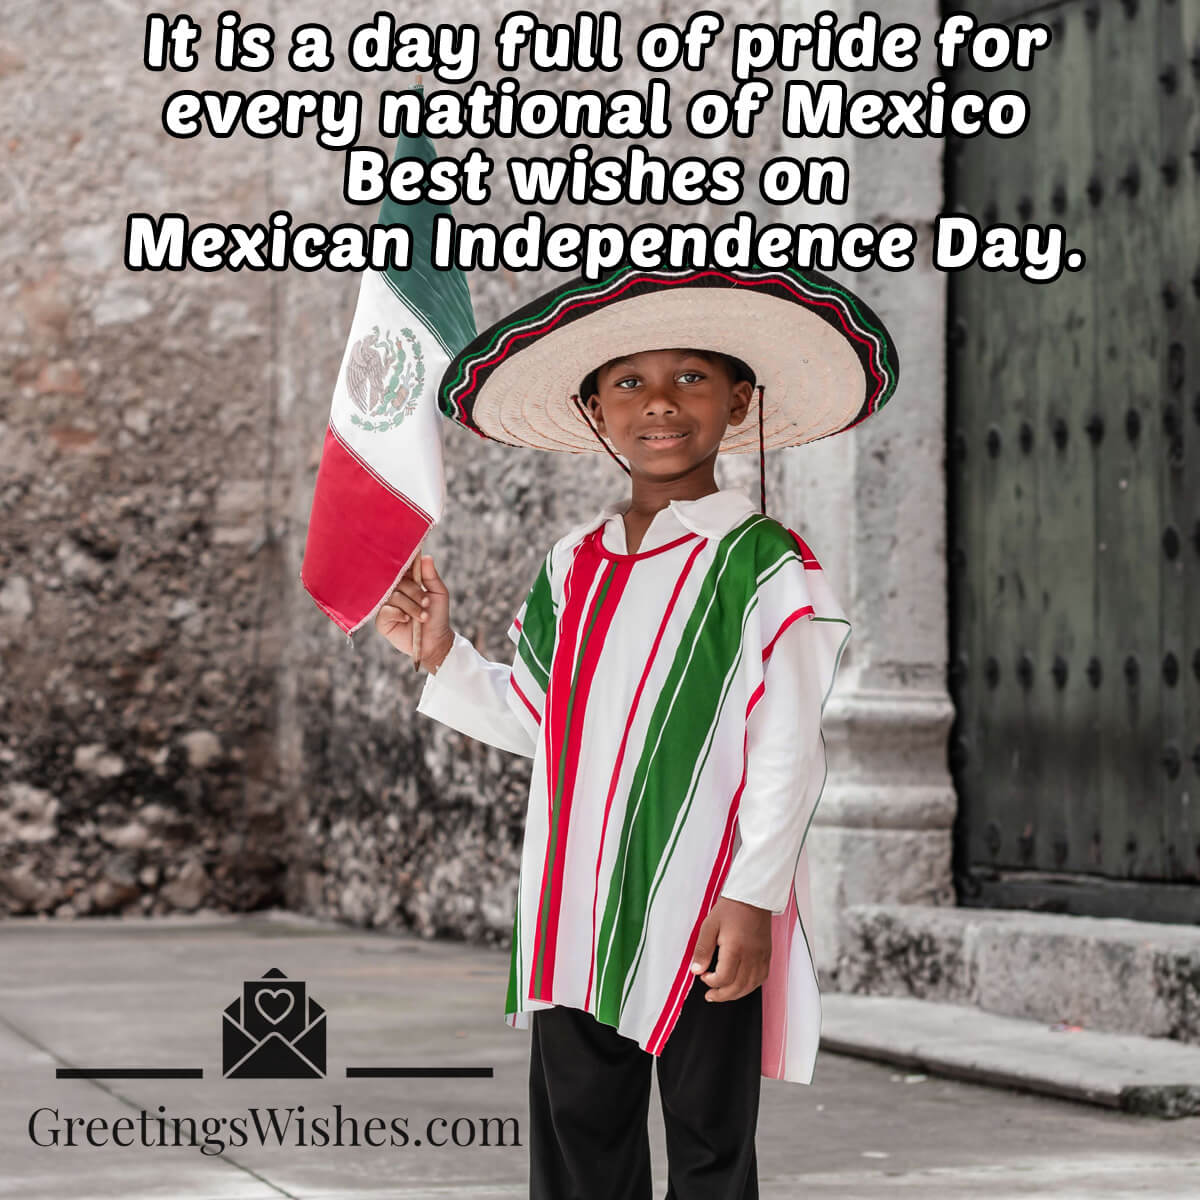 Mexican Independence Day Message